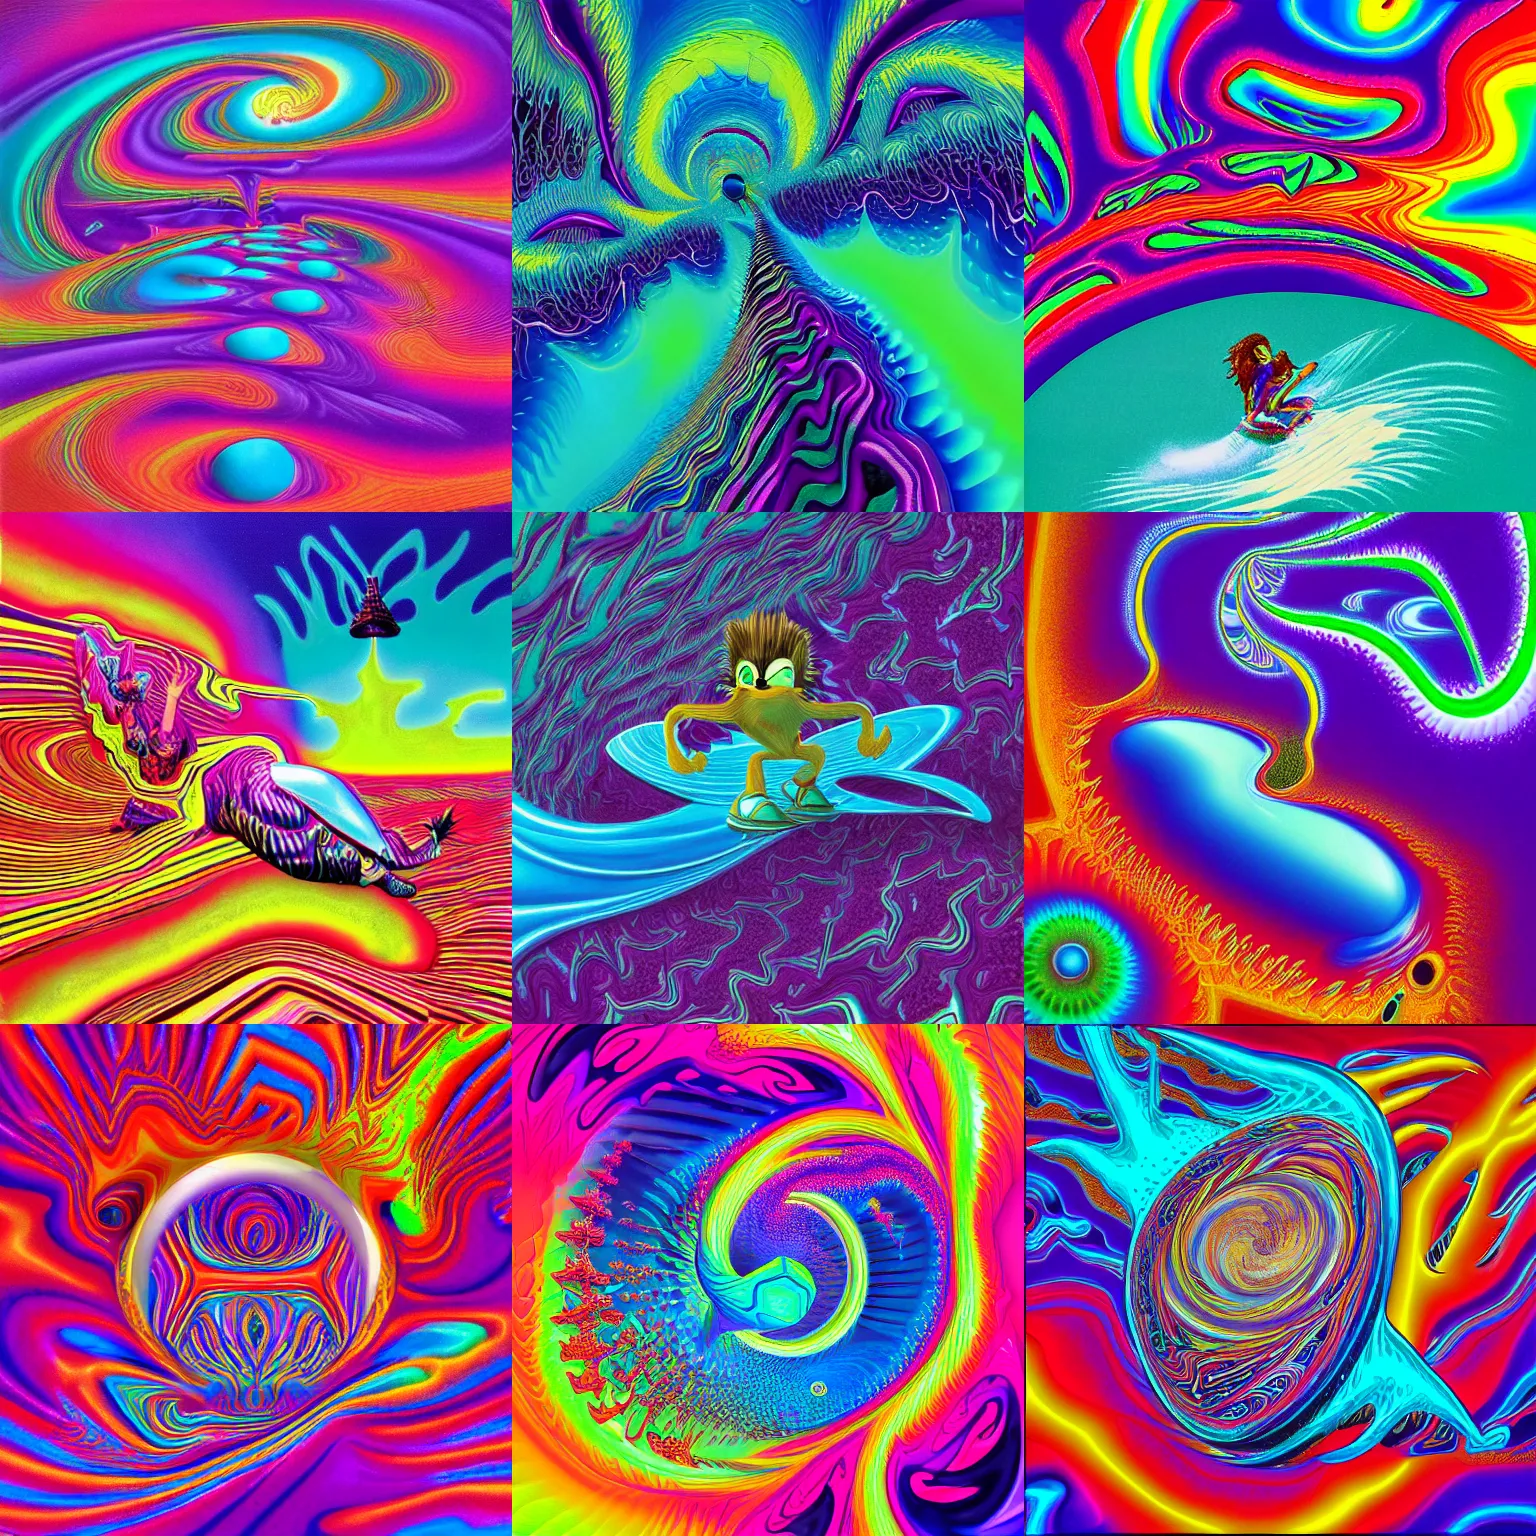 Prompt: surreal, recursive fractals, sharp, detailed professional, high quality portrait sonic airbrush art MGMT tame impala album cover portrait of a liquid dissolving LSD DMT sonic the hedgehog surfing through cyberspace, purple checkerboard background, 1990s 1992 Sega Genesis video game album cover